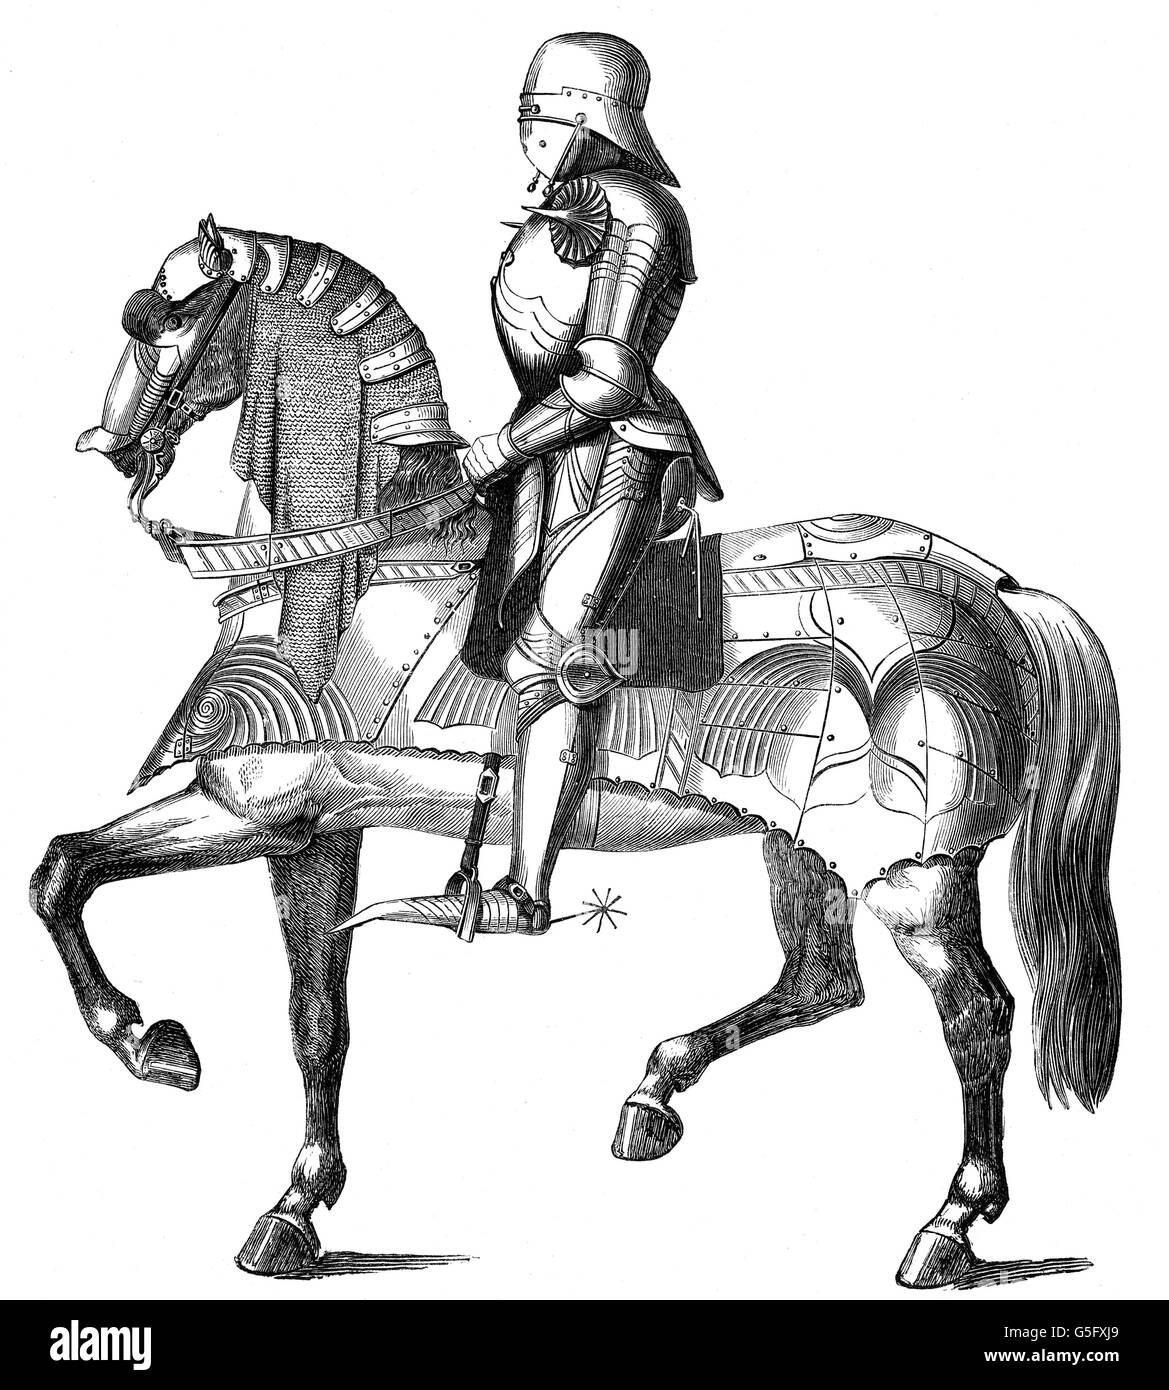 military, Middle Ages, knight in full armour, 15th century, wood engraving, 19th century, horse, horses, armament, armaments, spurs, spur, poulaine, crackowes, soldier, soldiers, warrior, warriors, rider, riders, cavalryman, cavalrymen, protection, troop, troops, army, armies, knight's armour, knight's armor, armour, armor, historic, historical, medieval, NOT, people, Additional-Rights-Clearences-Not Available Stock Photo